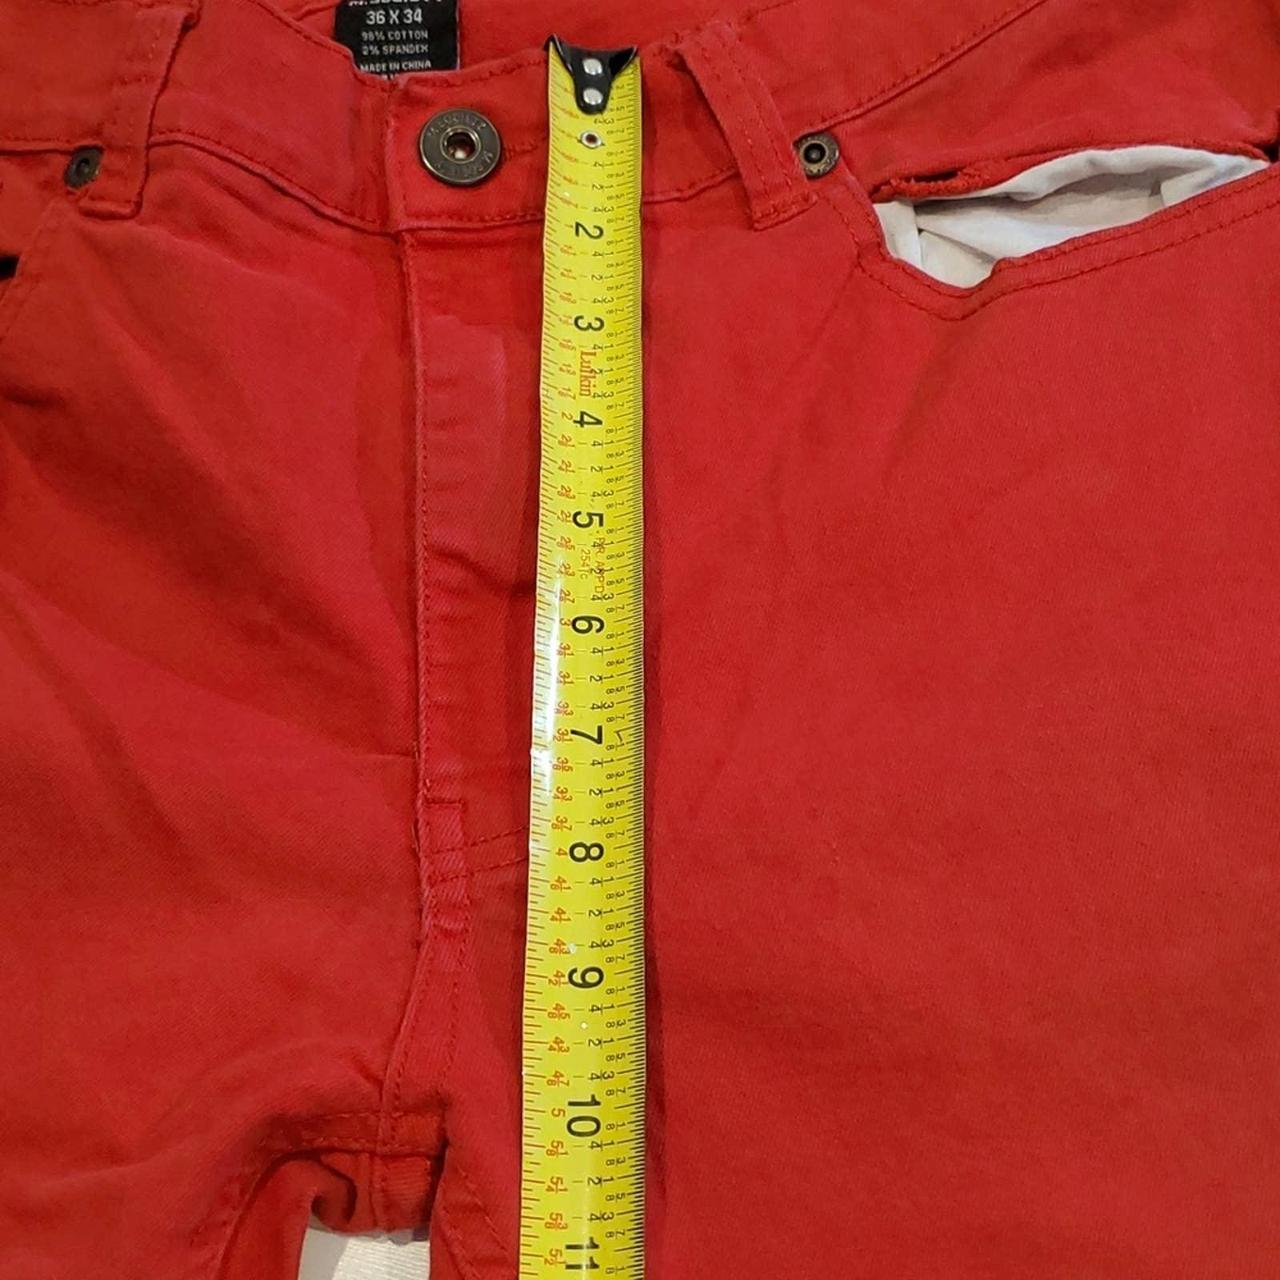 Product Image 4 - See measurement pics. Good condition